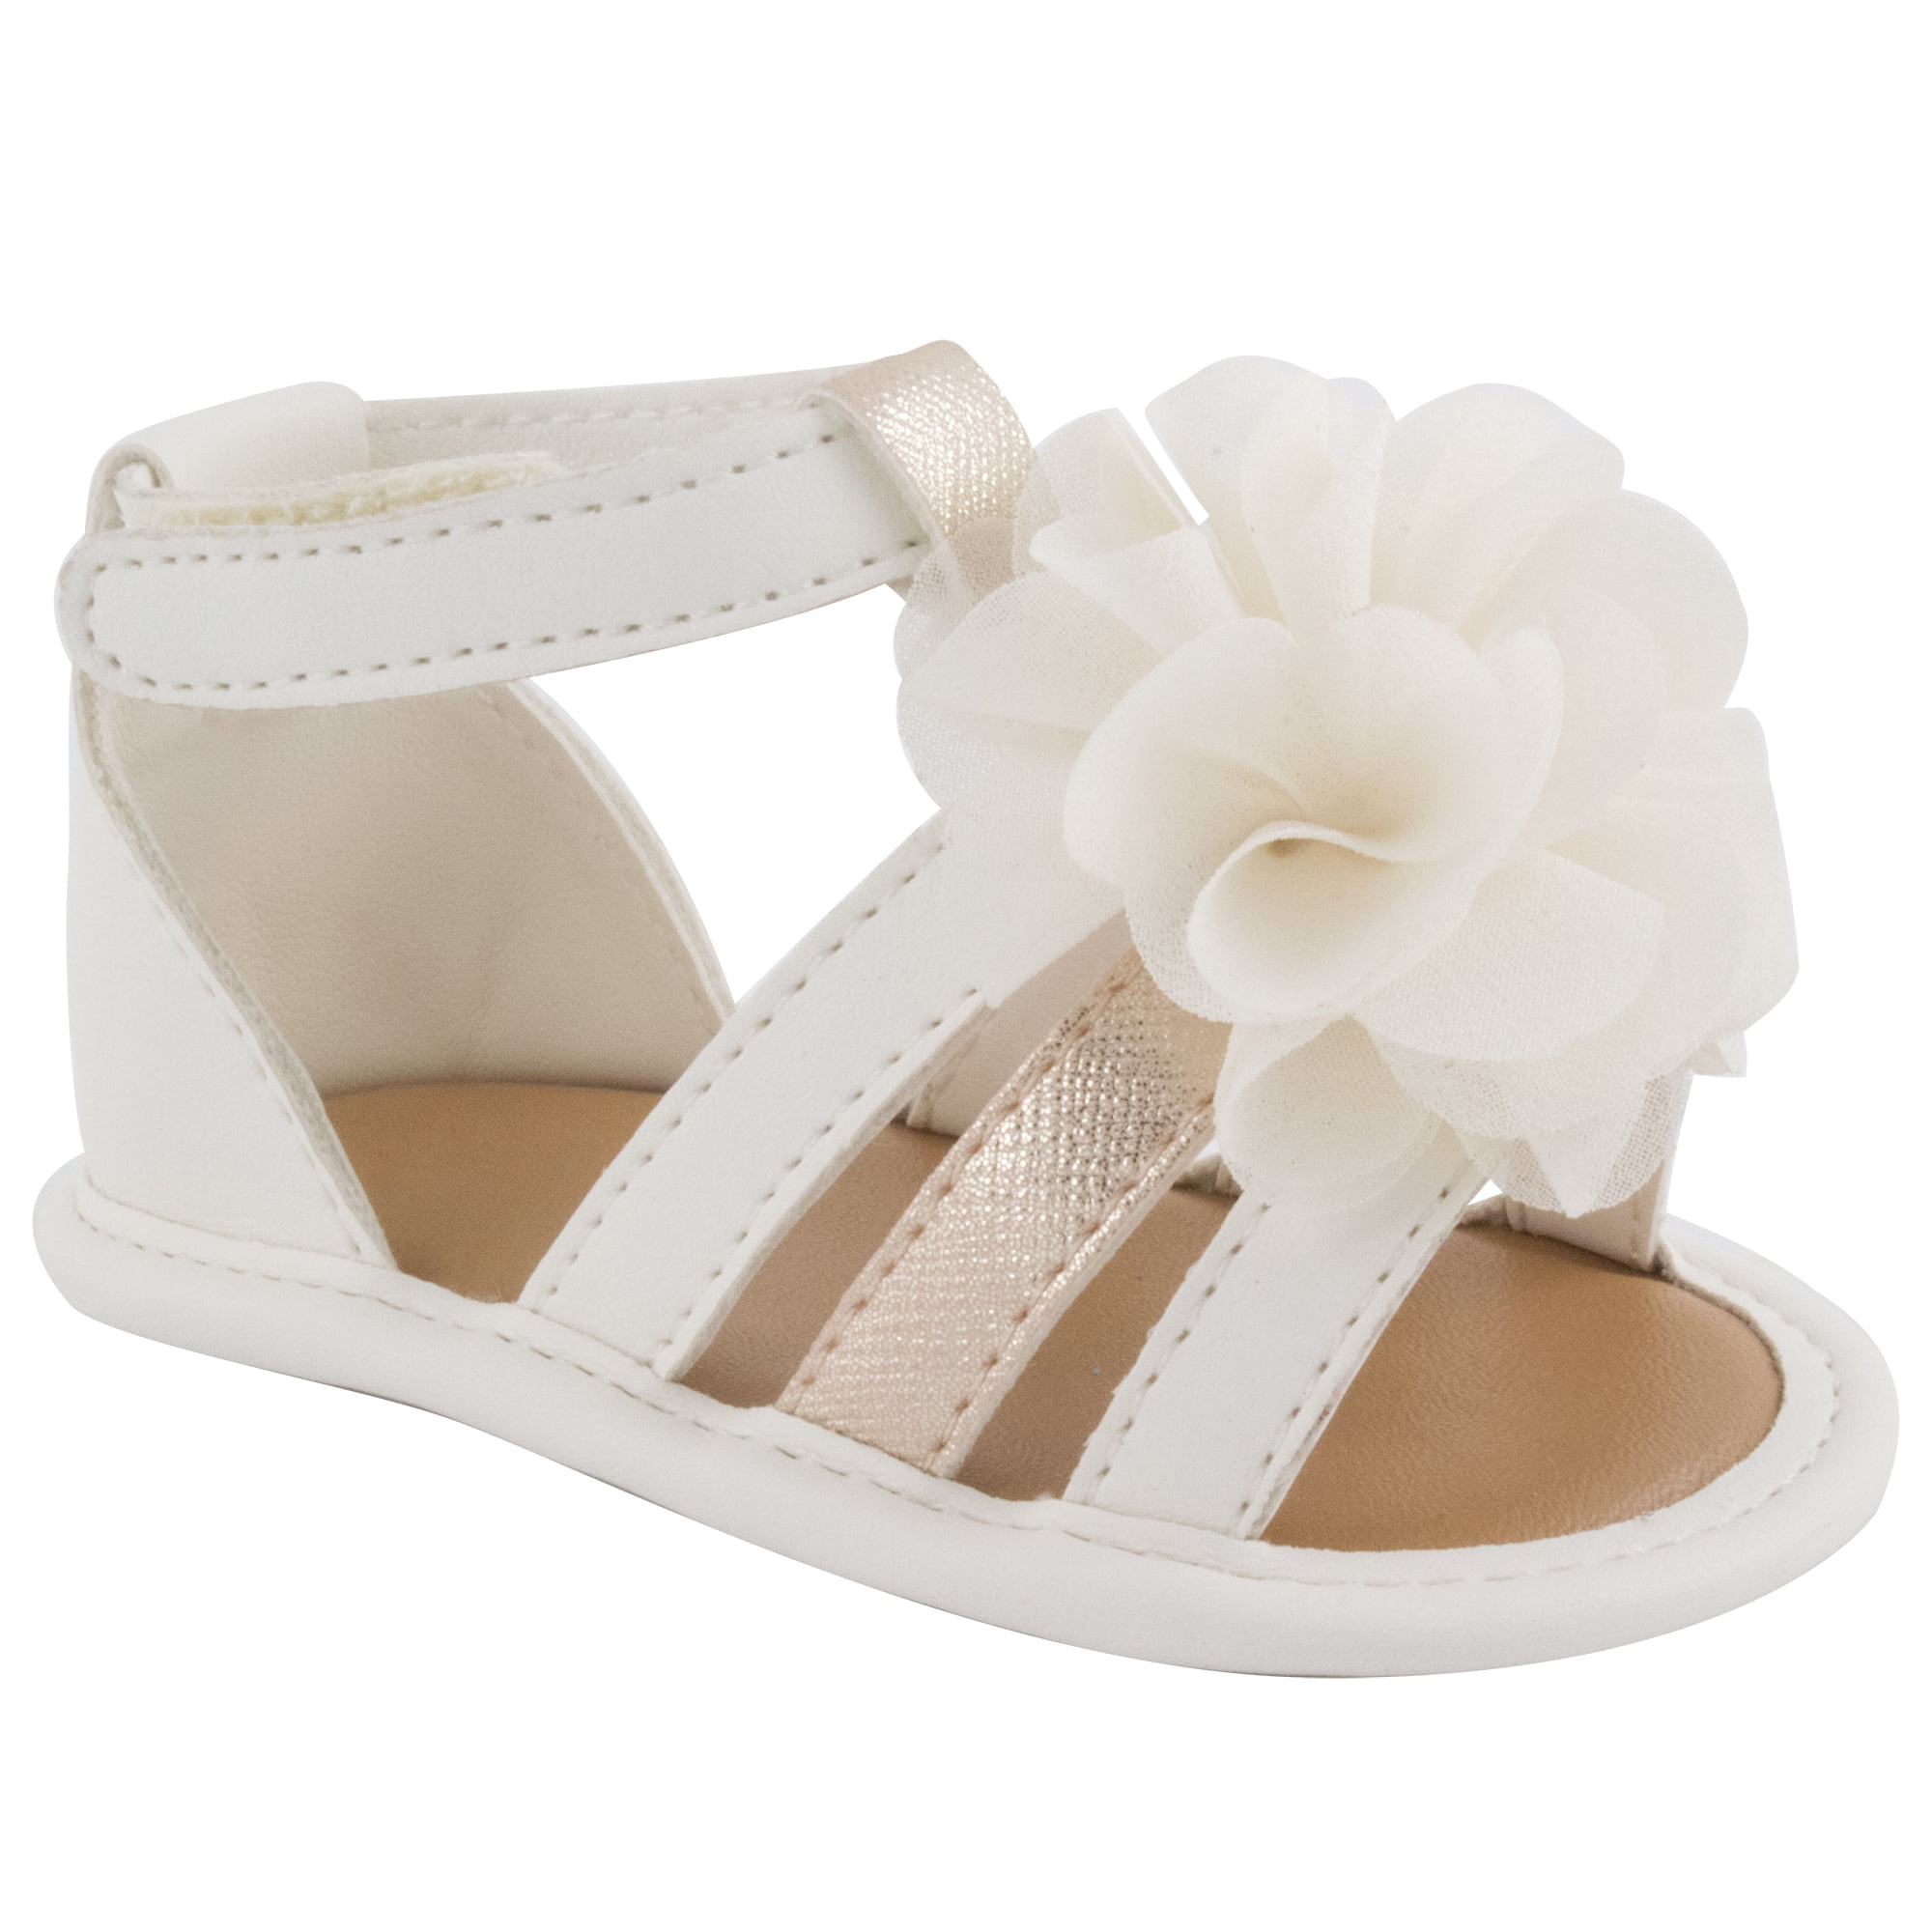 Baby Deer, Coralan Infant Soft Sole Sandal With Chiffon Flower (Infant ...